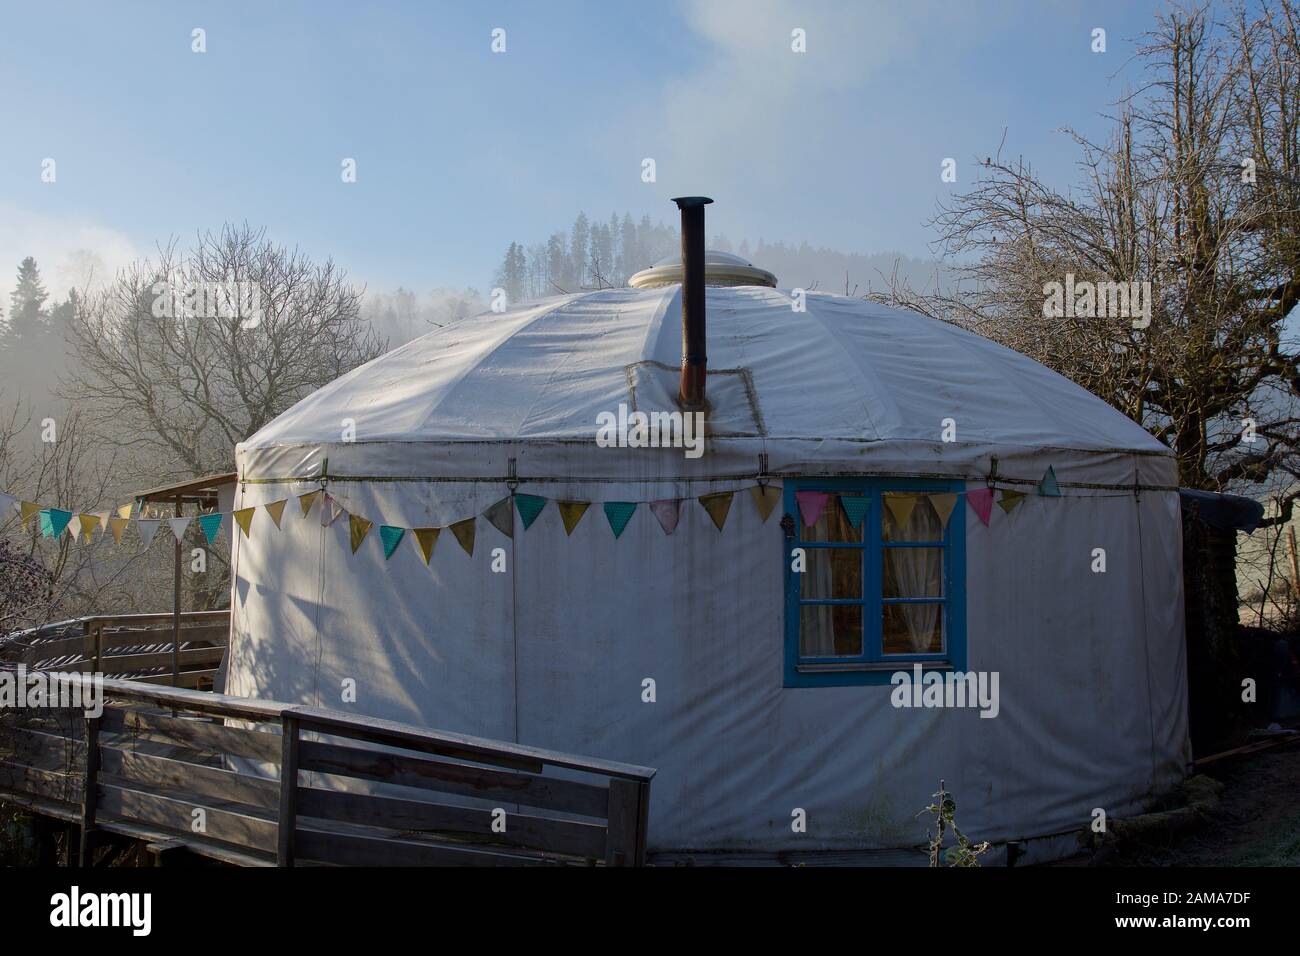 Tiny house in Yurt style for alternative living Stock Photo